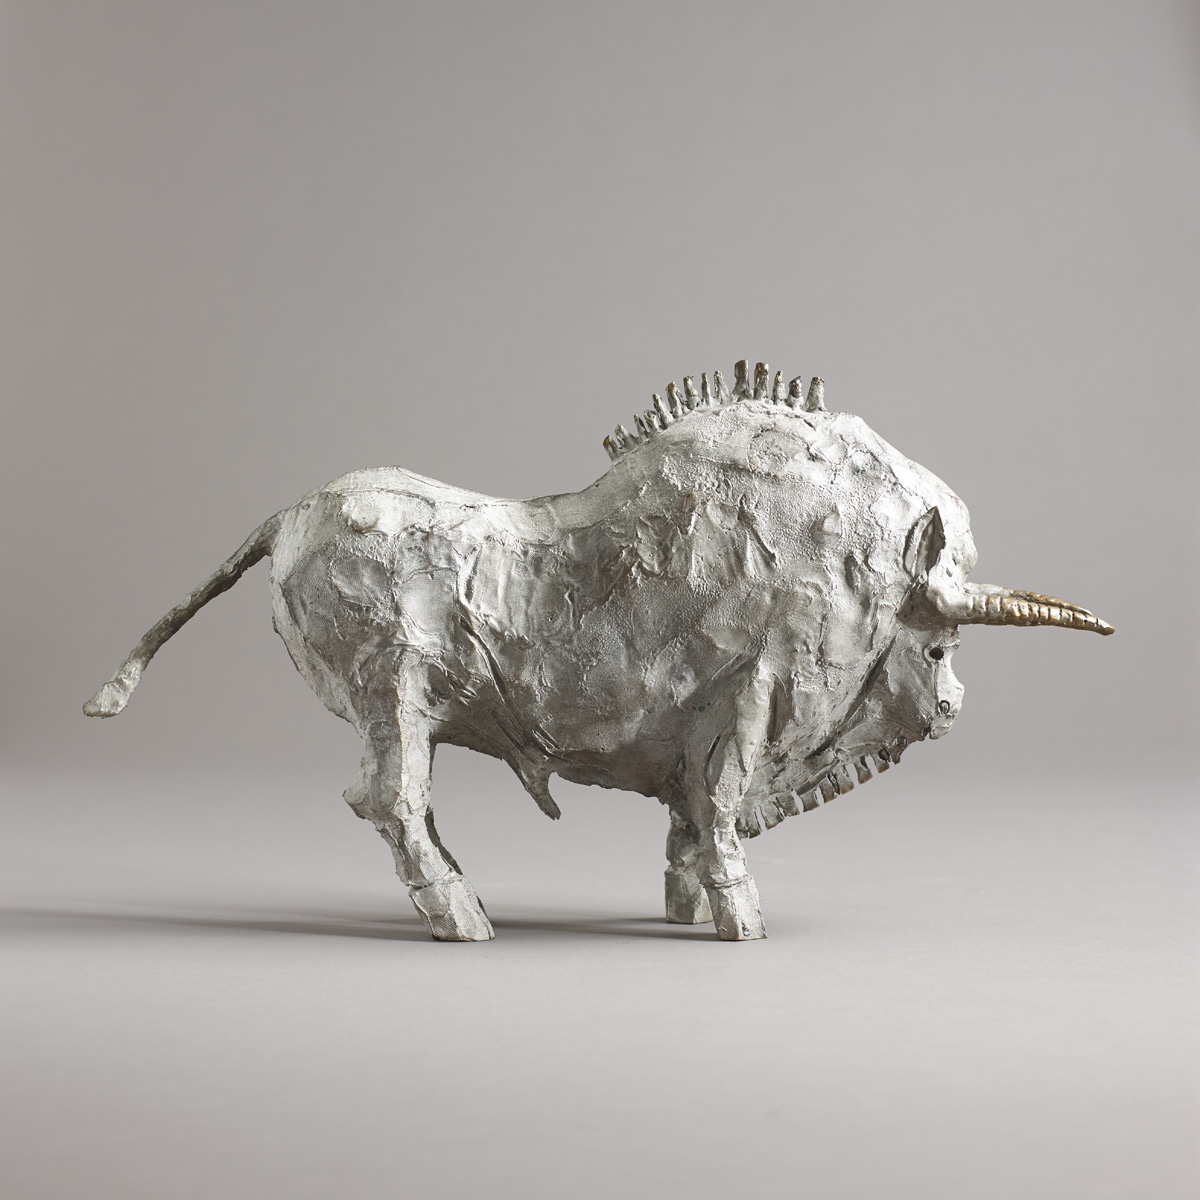 FIGHTING BULL, 1998 by John Behan sold for 4,200 at Whyte's Auctions